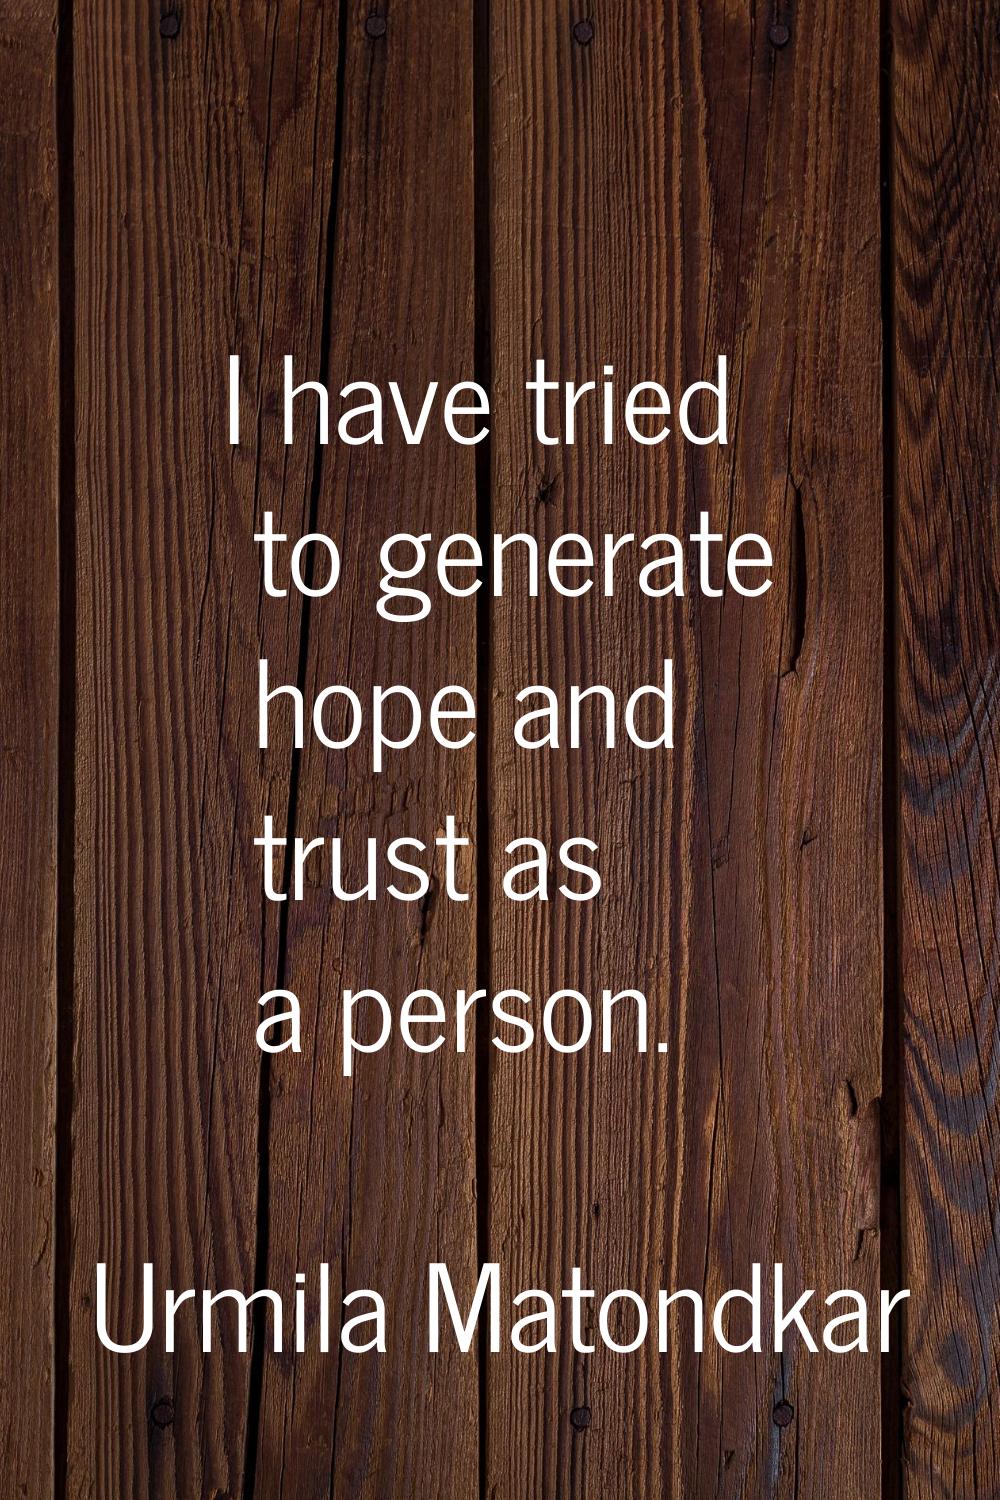 I have tried to generate hope and trust as a person.